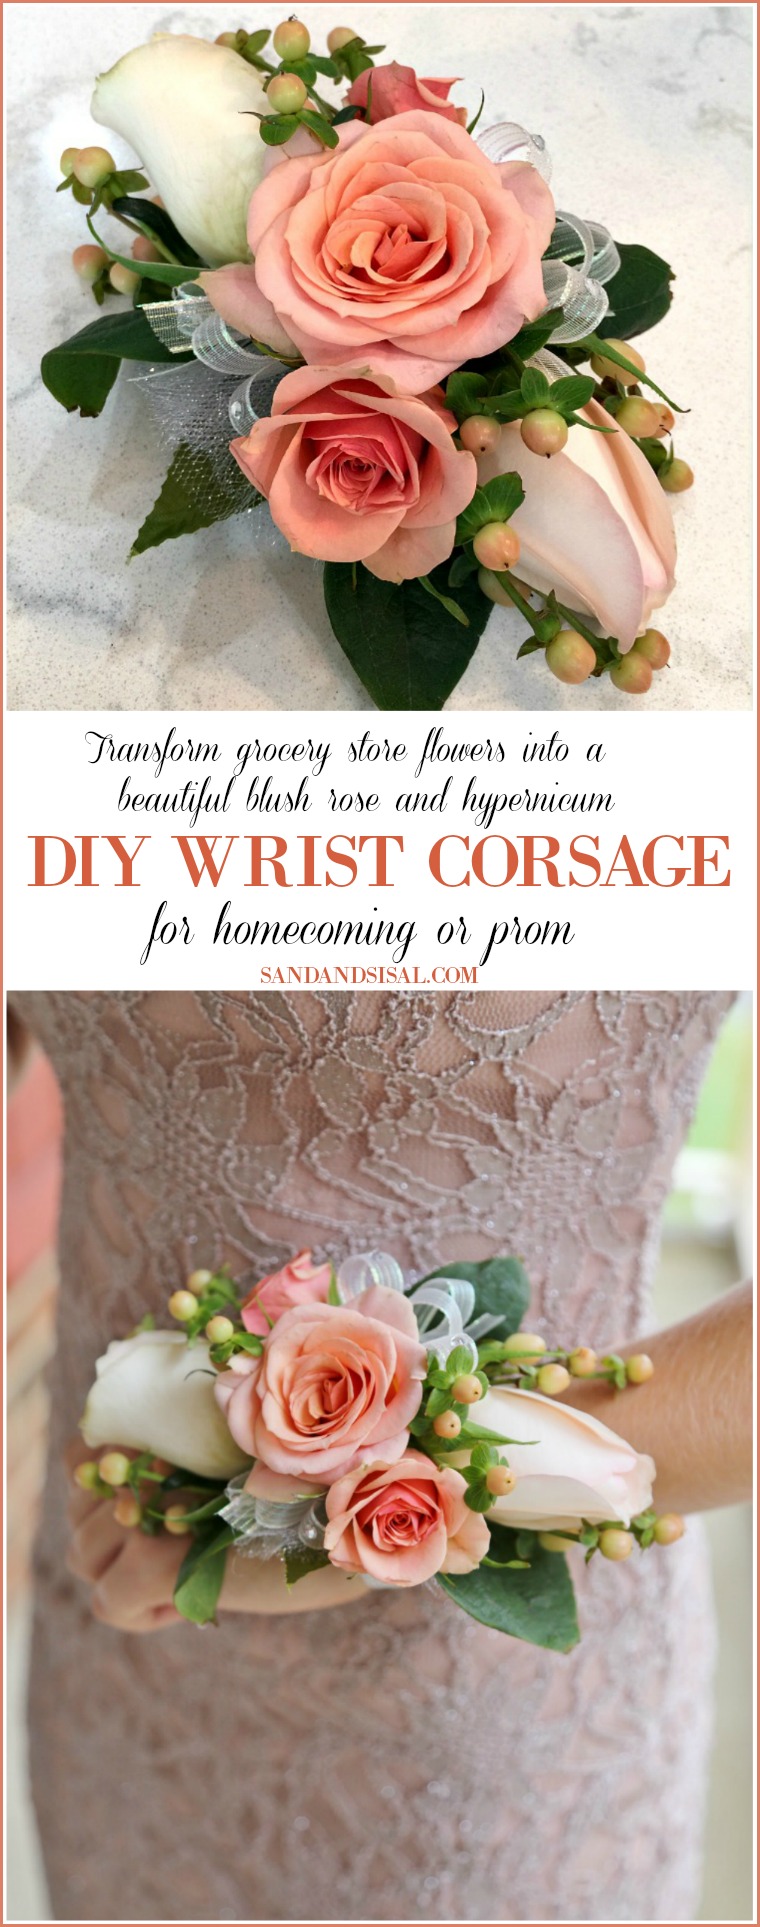 Diy Wrist Corsage For Homecoming Or Prom Sand And Sisal Meopari